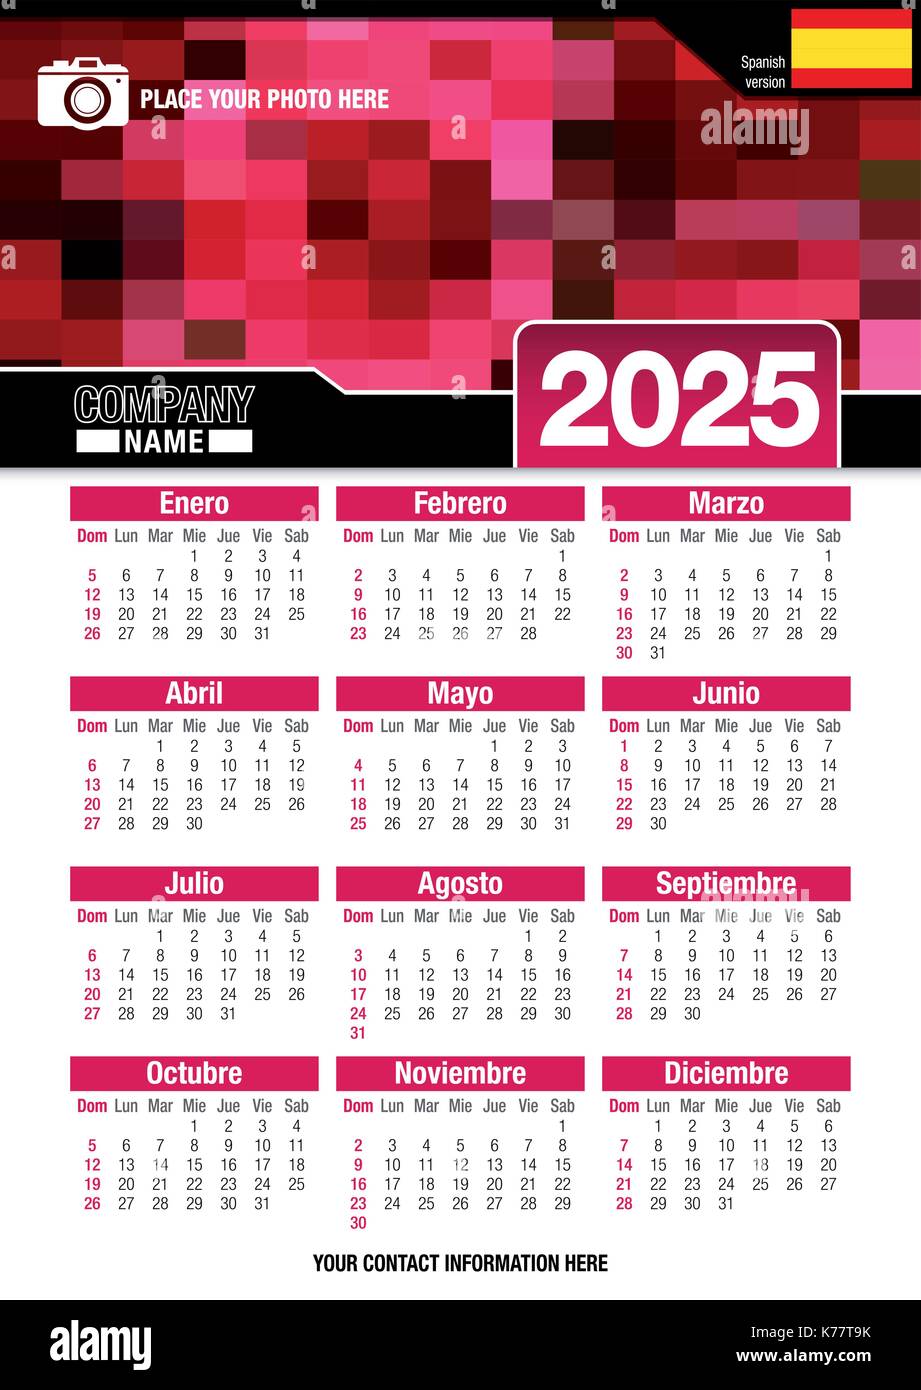 useful-wall-calendar-2025-with-design-of-red-colors-mosaic-format-a4-vertical-size-210mm-x